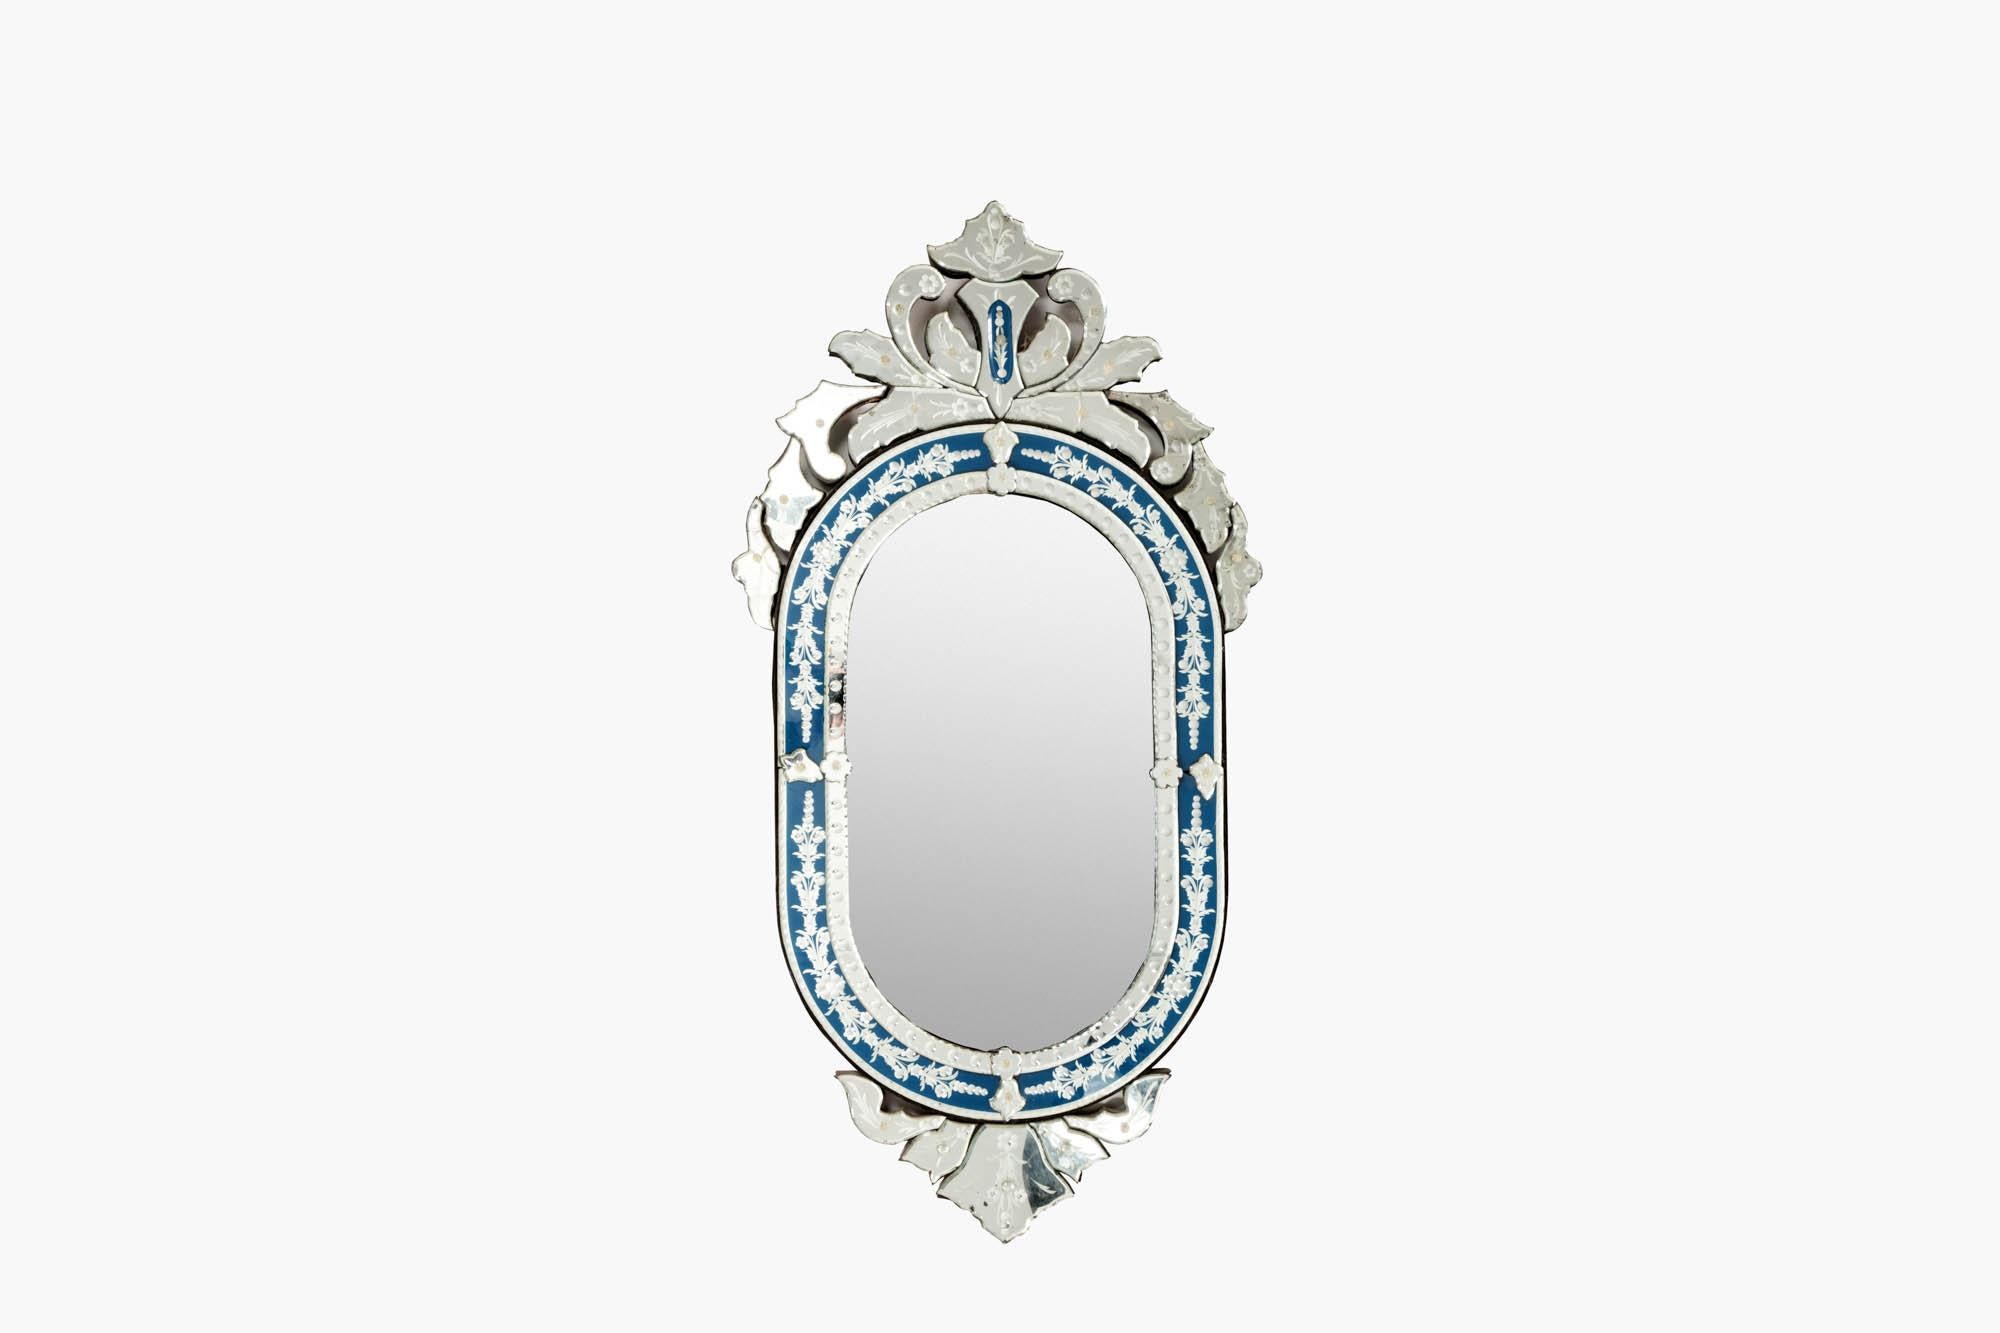 Neoclassical Highly Decorative 19th Century Venetian Glass Mirror For Sale